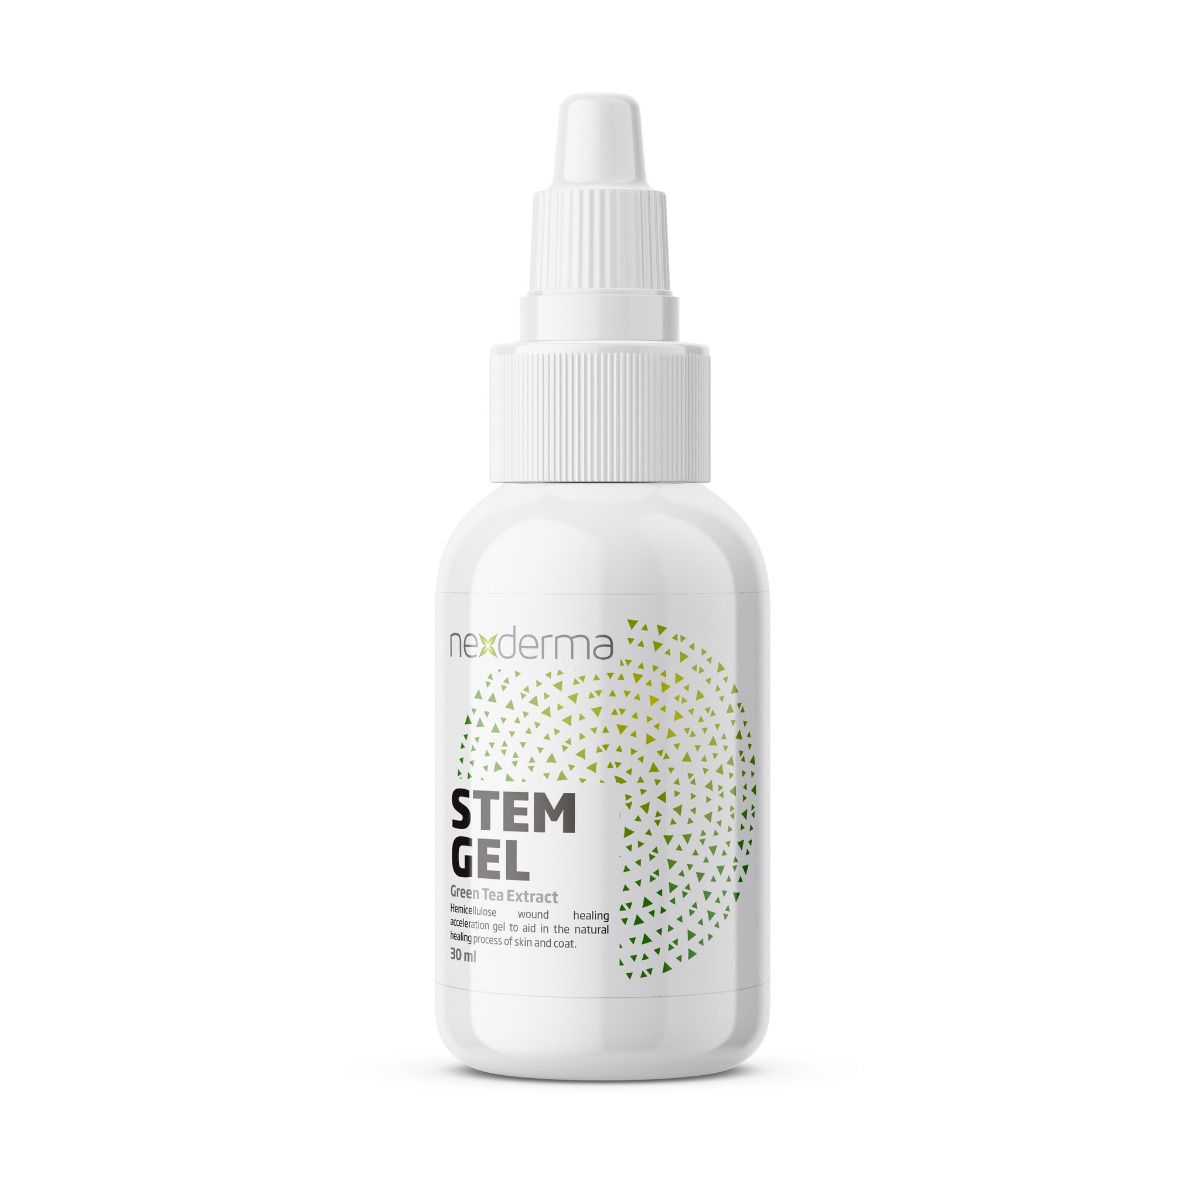 Nexderma Stem Gel is an advanced wound healing accelerator. Formulated from plant and stem cell extracts retrieved from rare Brazilian rainforest plants to promote efficient healing, and can be used for chronic wounds, chronic infections, general wounds, various dermatological issues including hot spots and rashes.